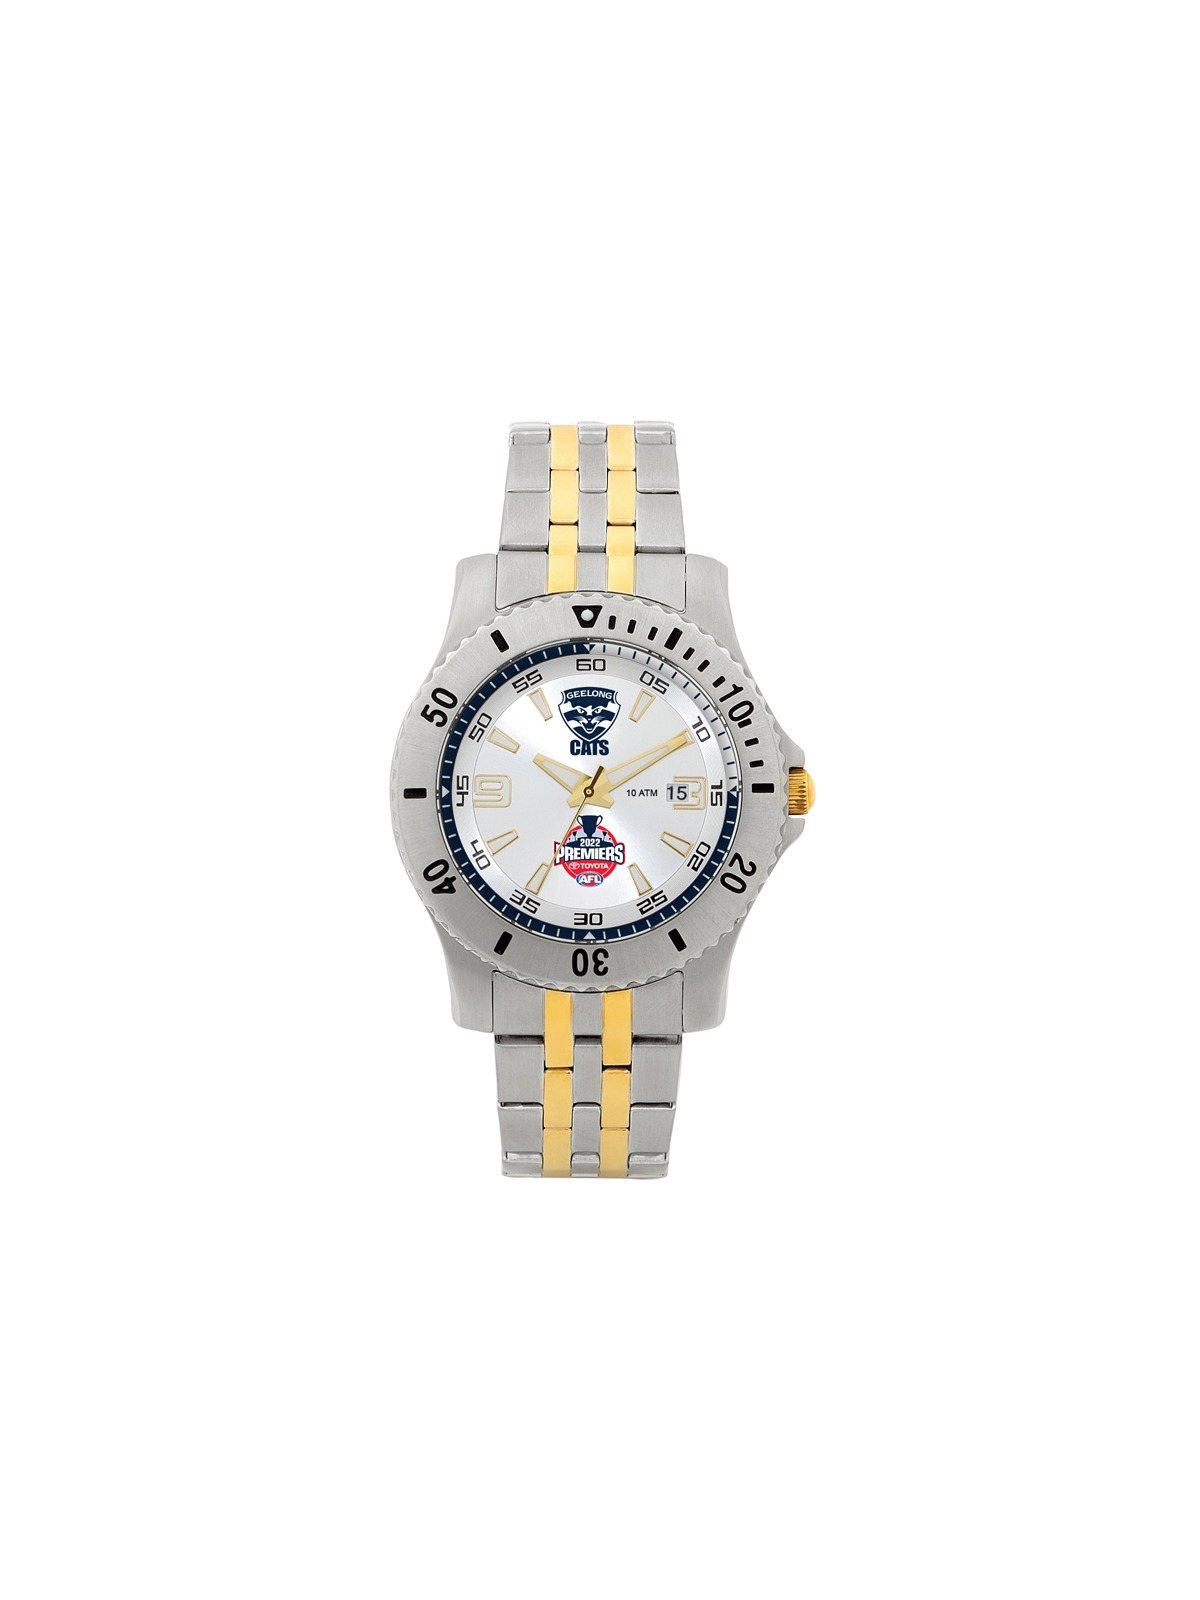 Geelong Cats AFL Premiers Limited Edition Watch (Pre-Order November)